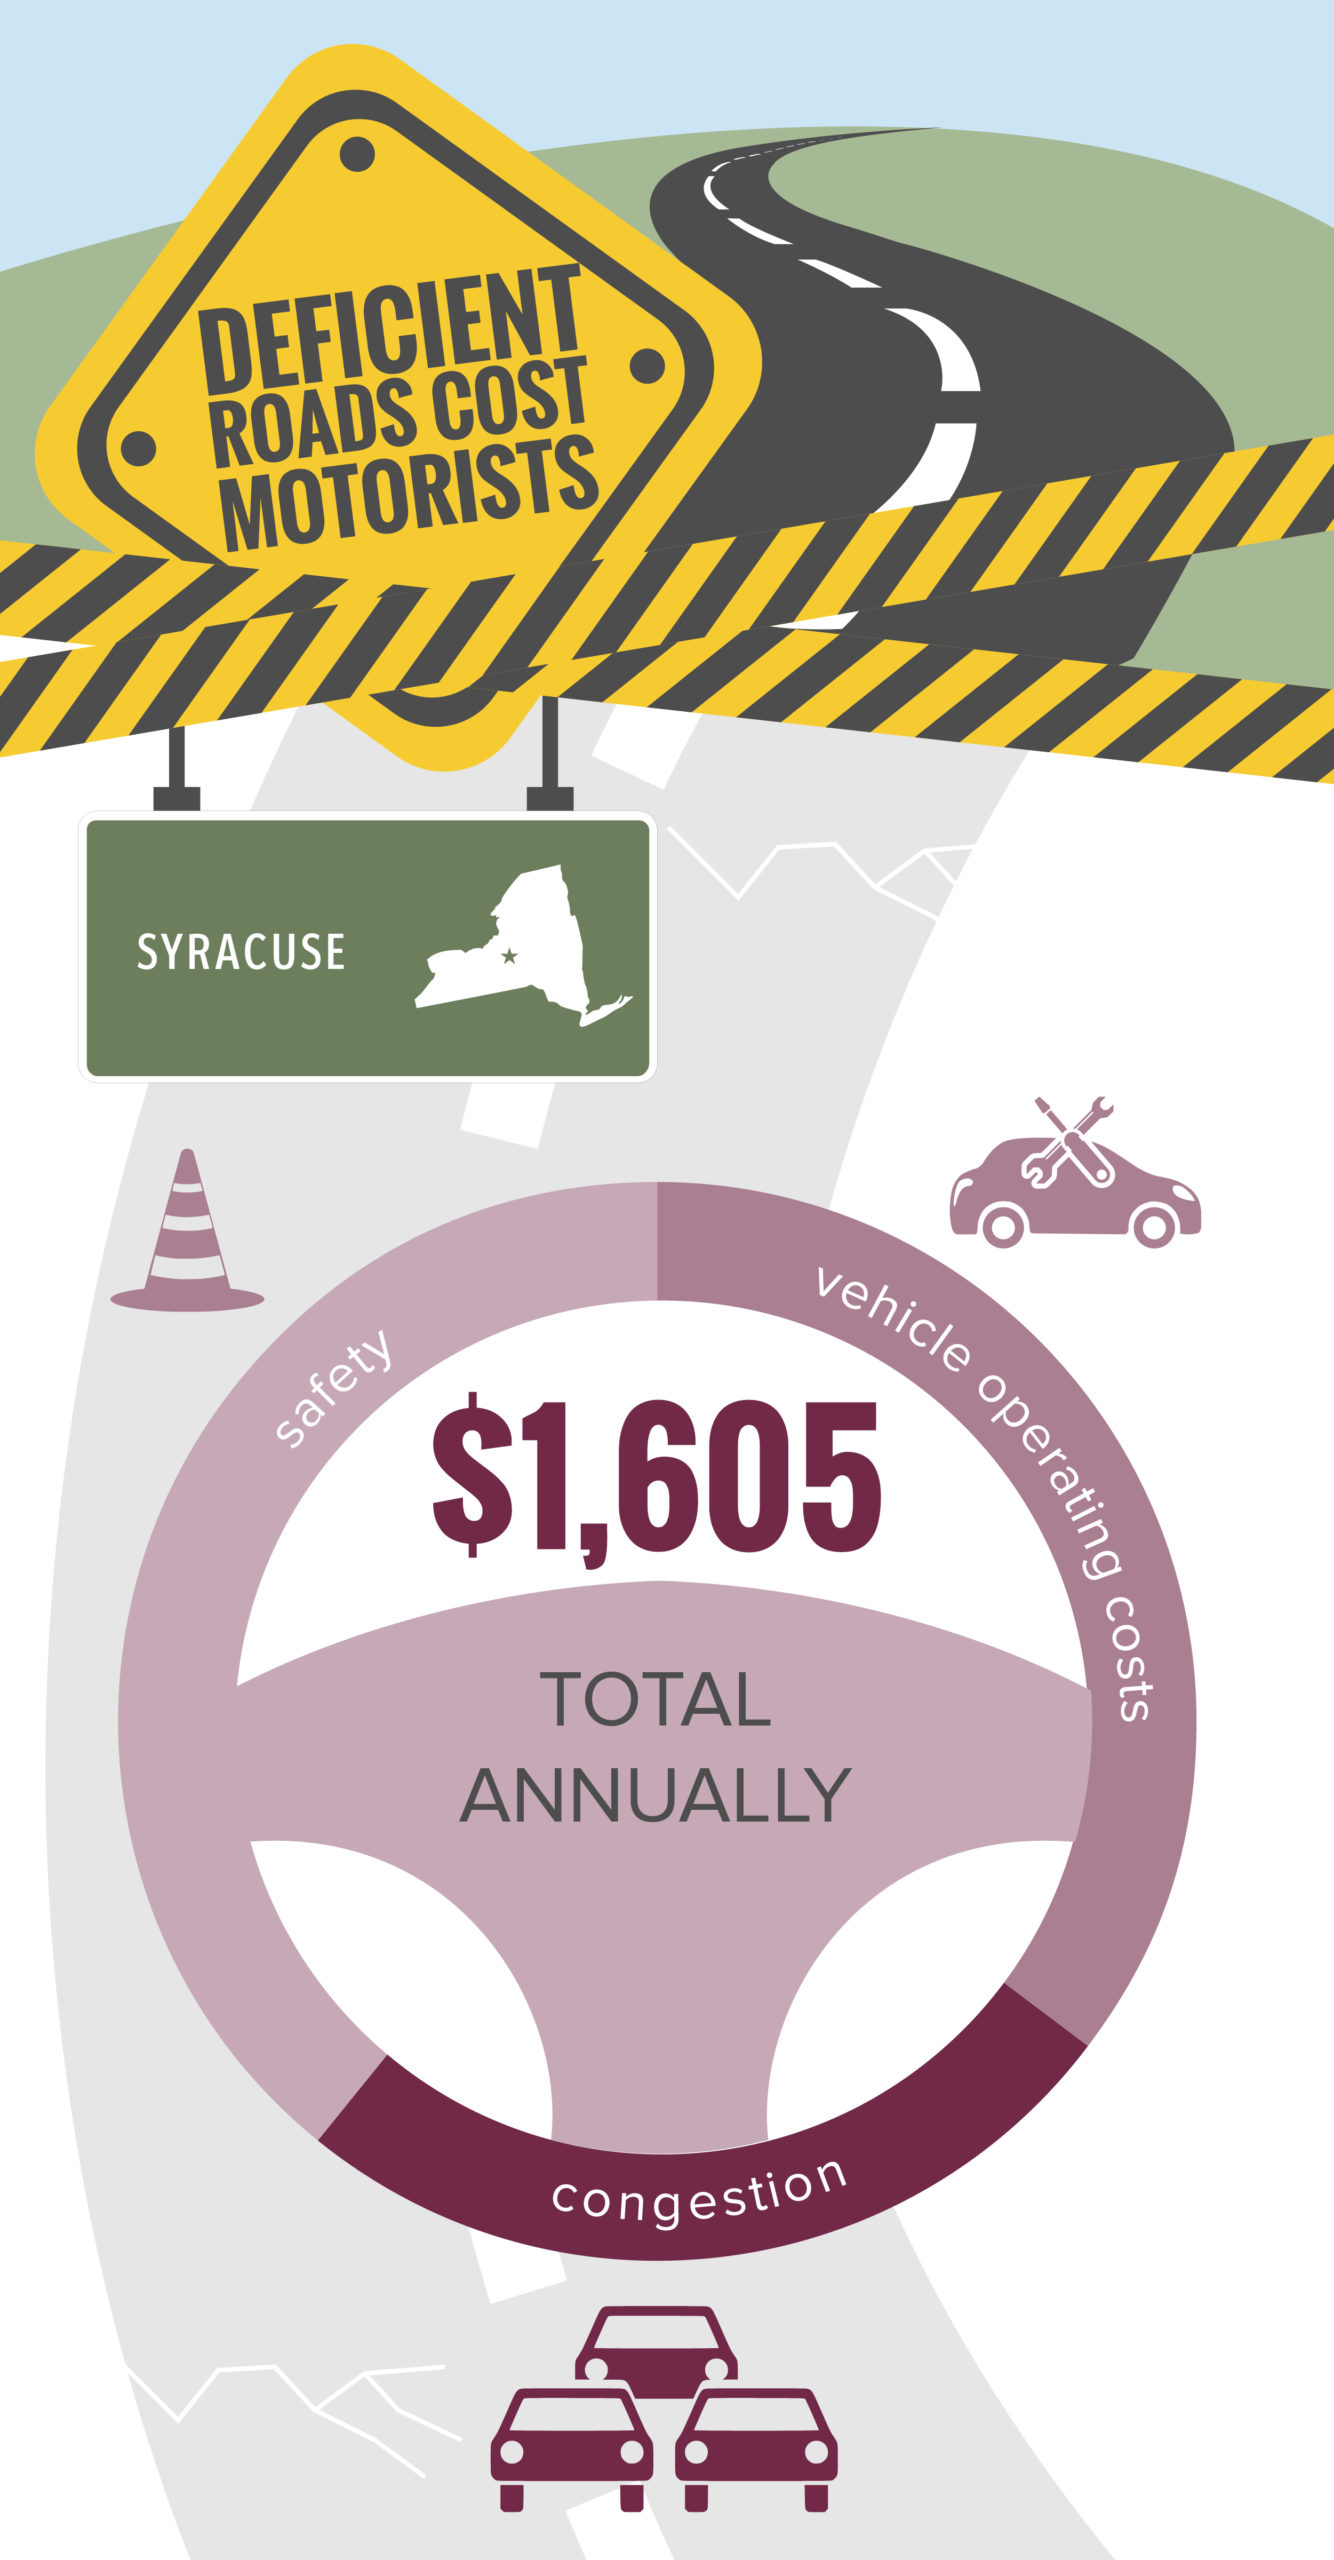 Syracuse Deficient Roads Cost to Motorists Infographic – January 2022